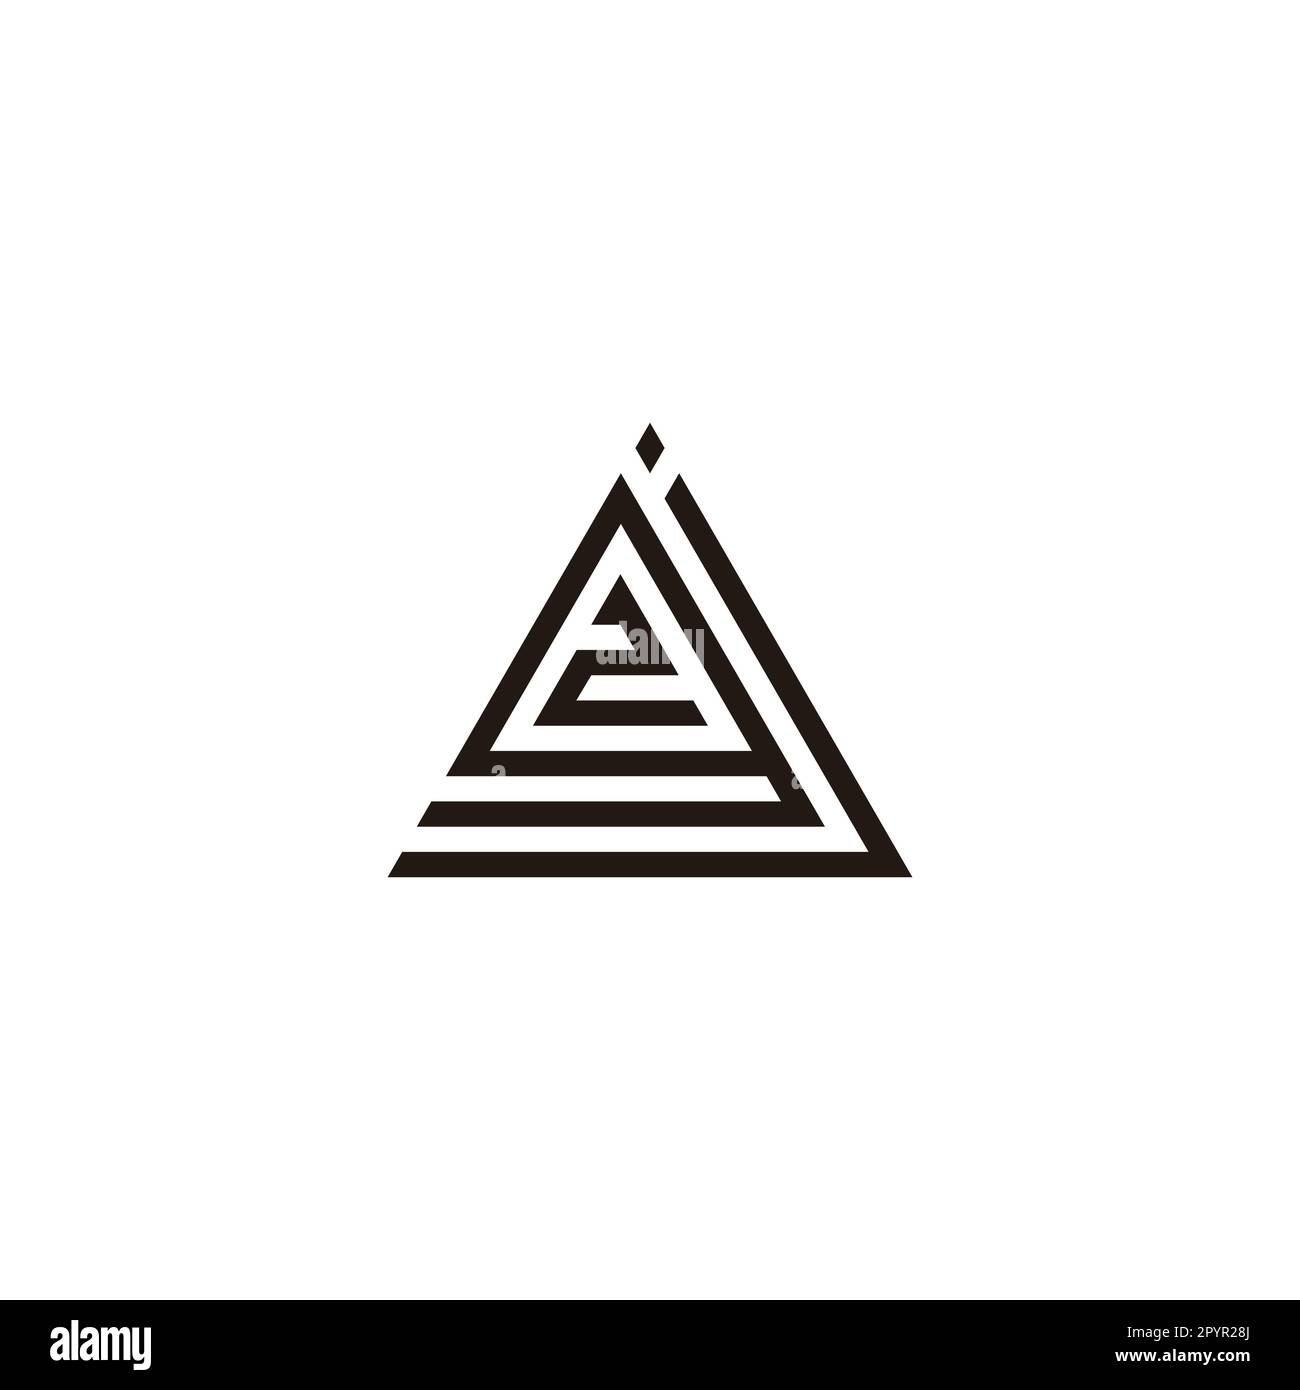 Letter j, g and number 2, triangle geometric symbol simple logo vector ...